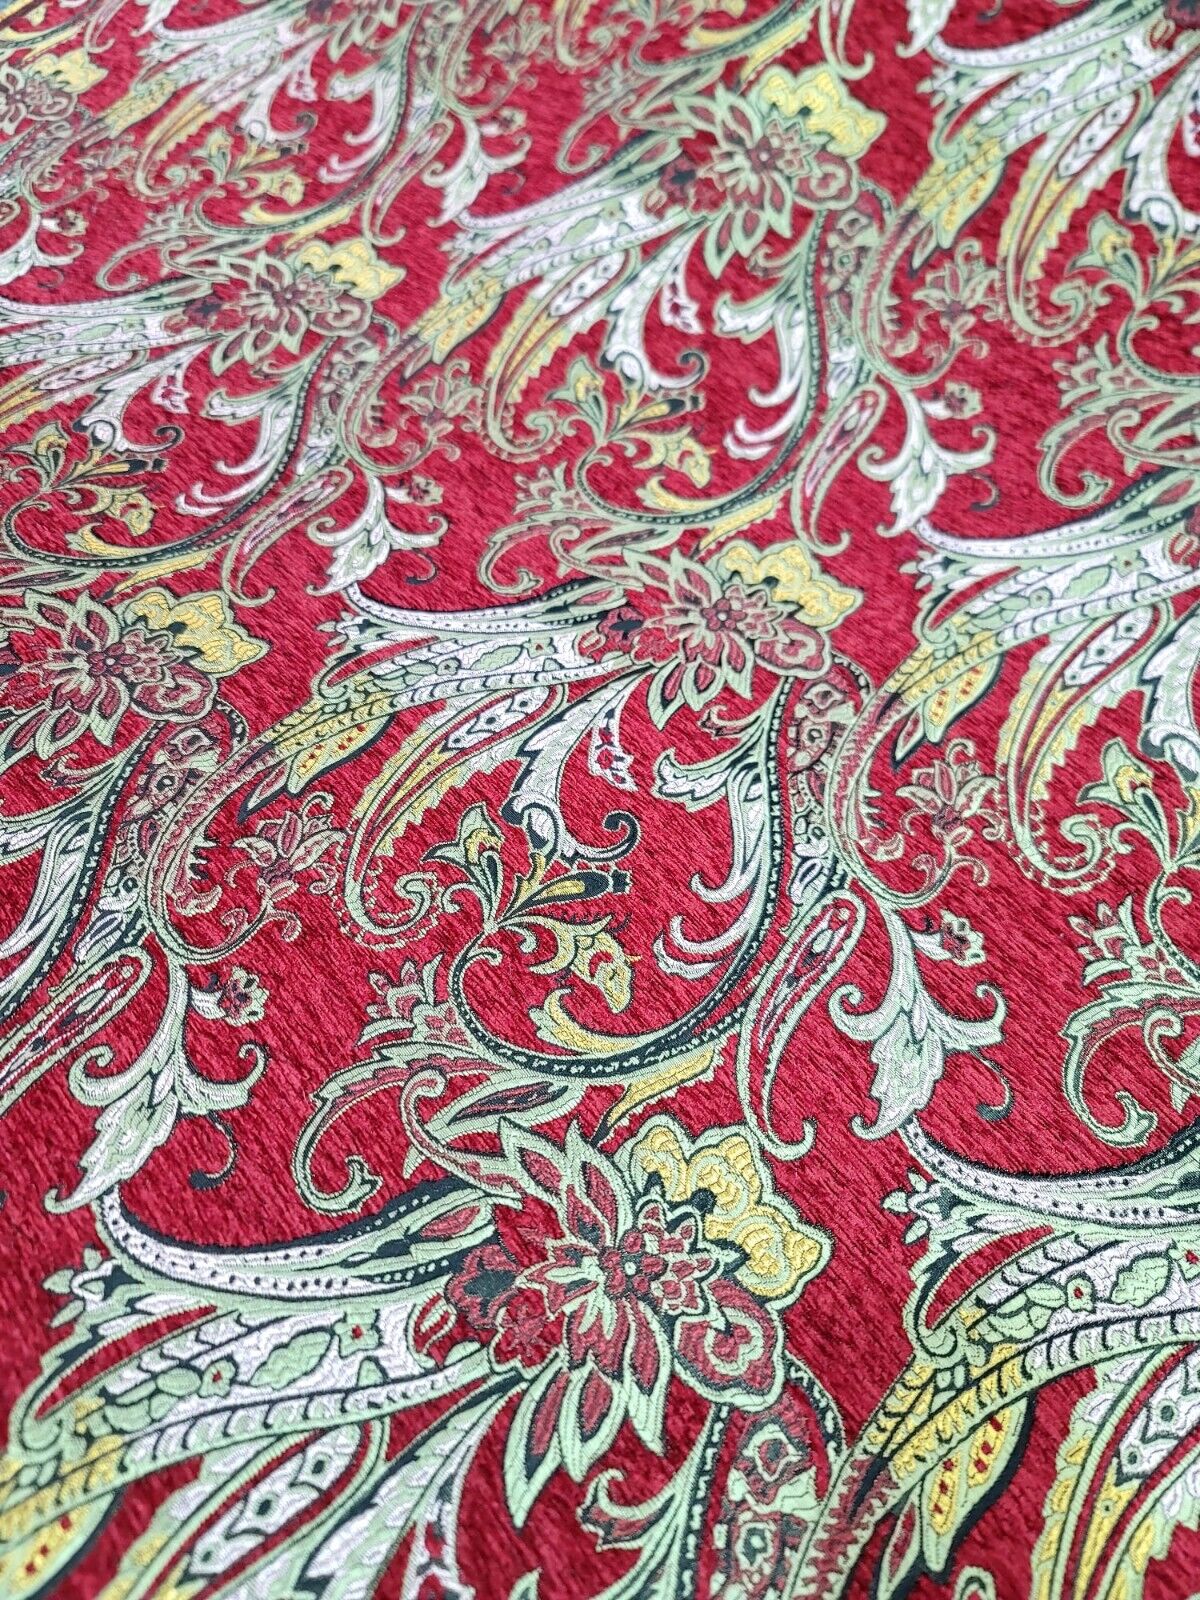 Red Gold Floral Damask Brocade Fabric - 60” Width - Sold By The Yard - Chenille